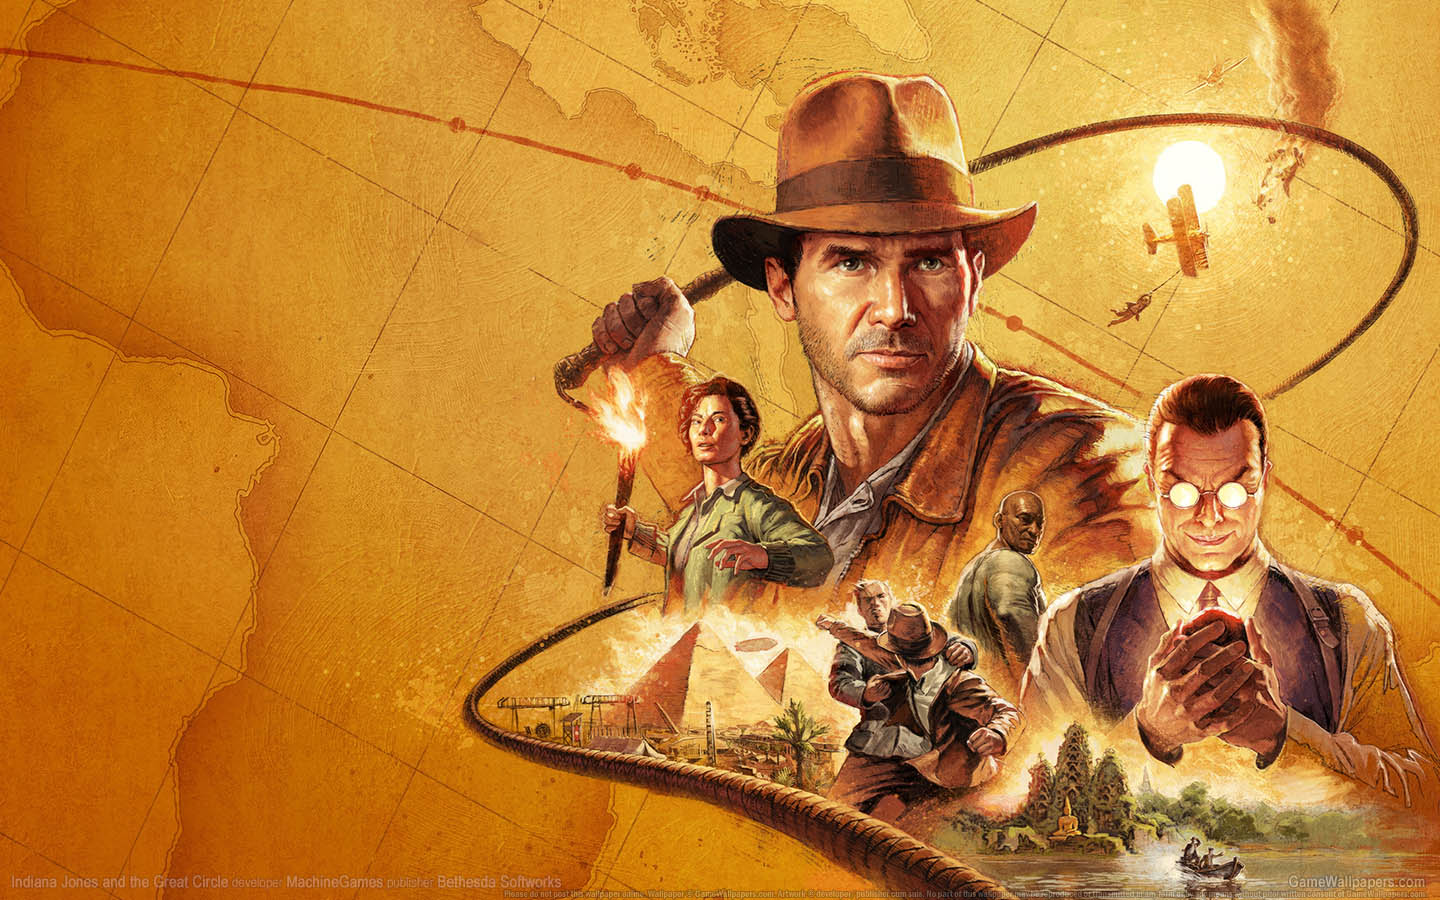 Indiana Jones and the Great Circle wallpaper 01 1440x900